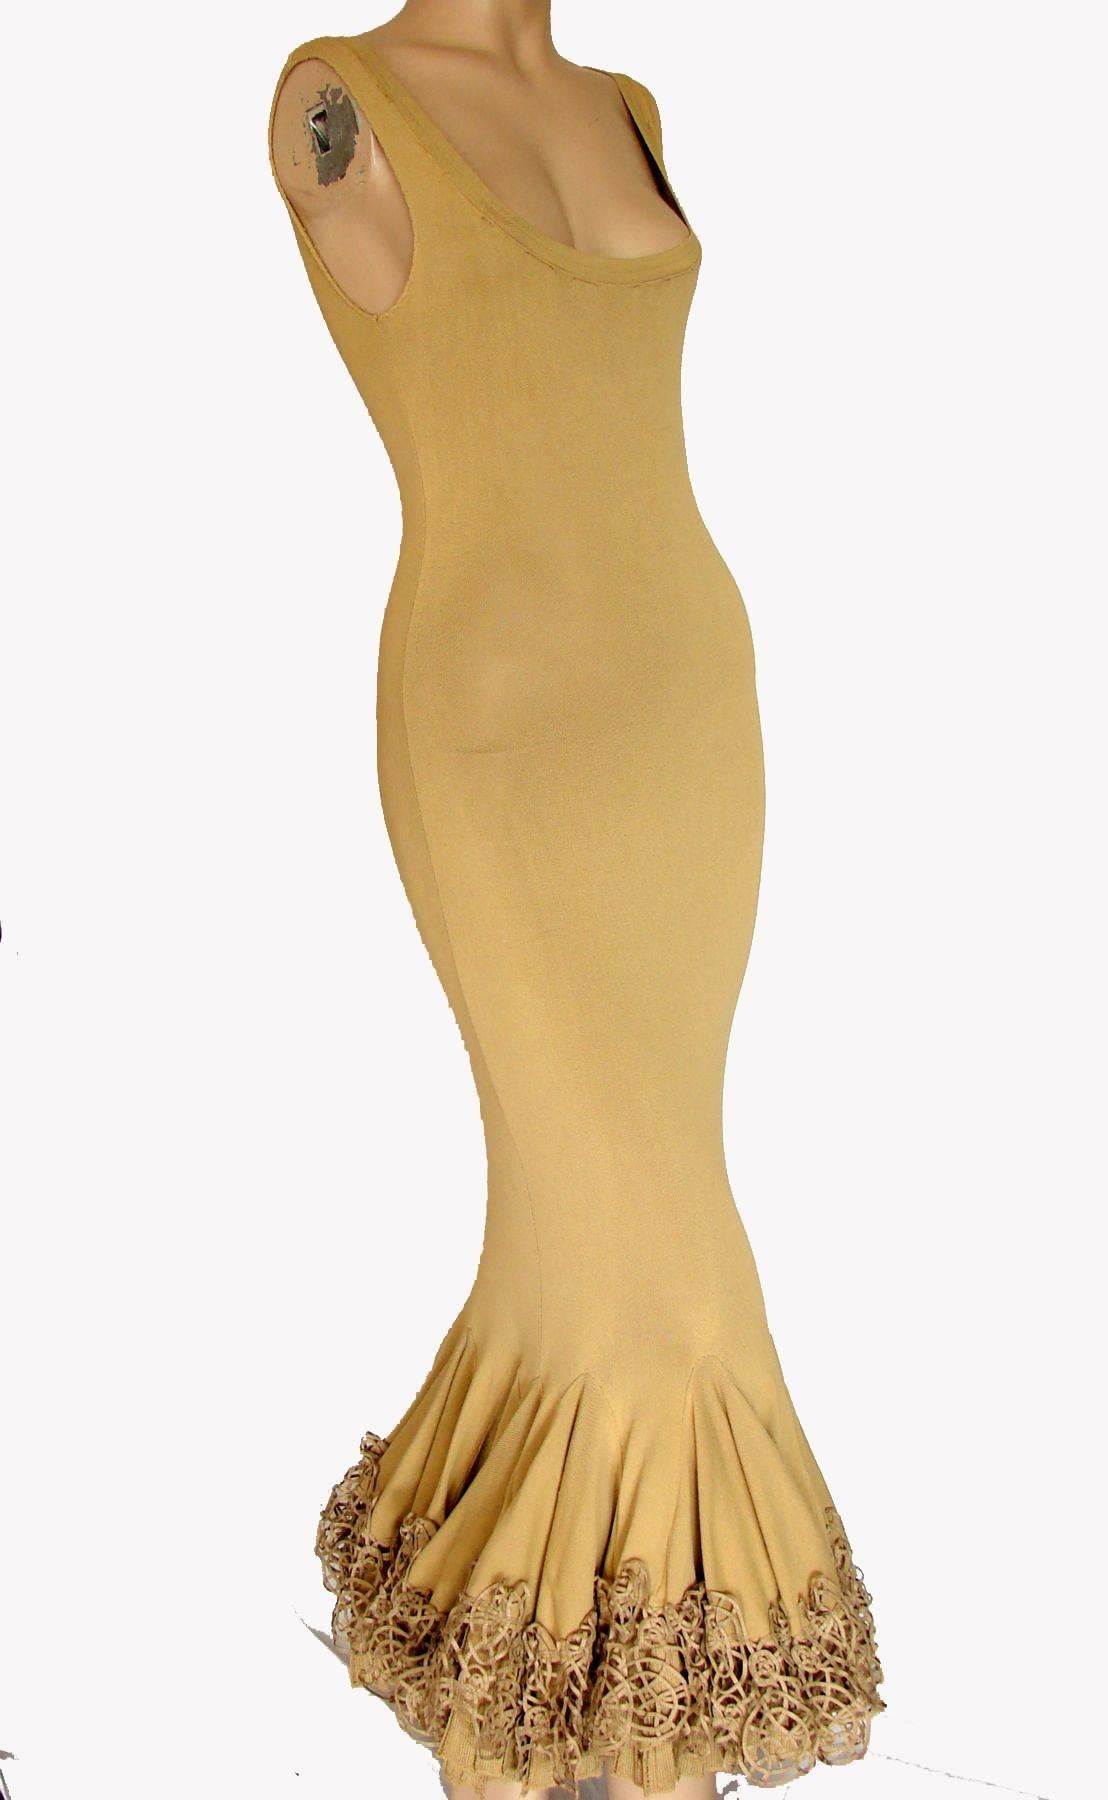 This fabulous Cavalli dress is made from a body-hugging jersey knit in a light tan shade.  The mermaid ruffle hem is incredible and features three rows of knit, netting and leatherette detailing.  Note that this dress is HEAVY at the bottom, but